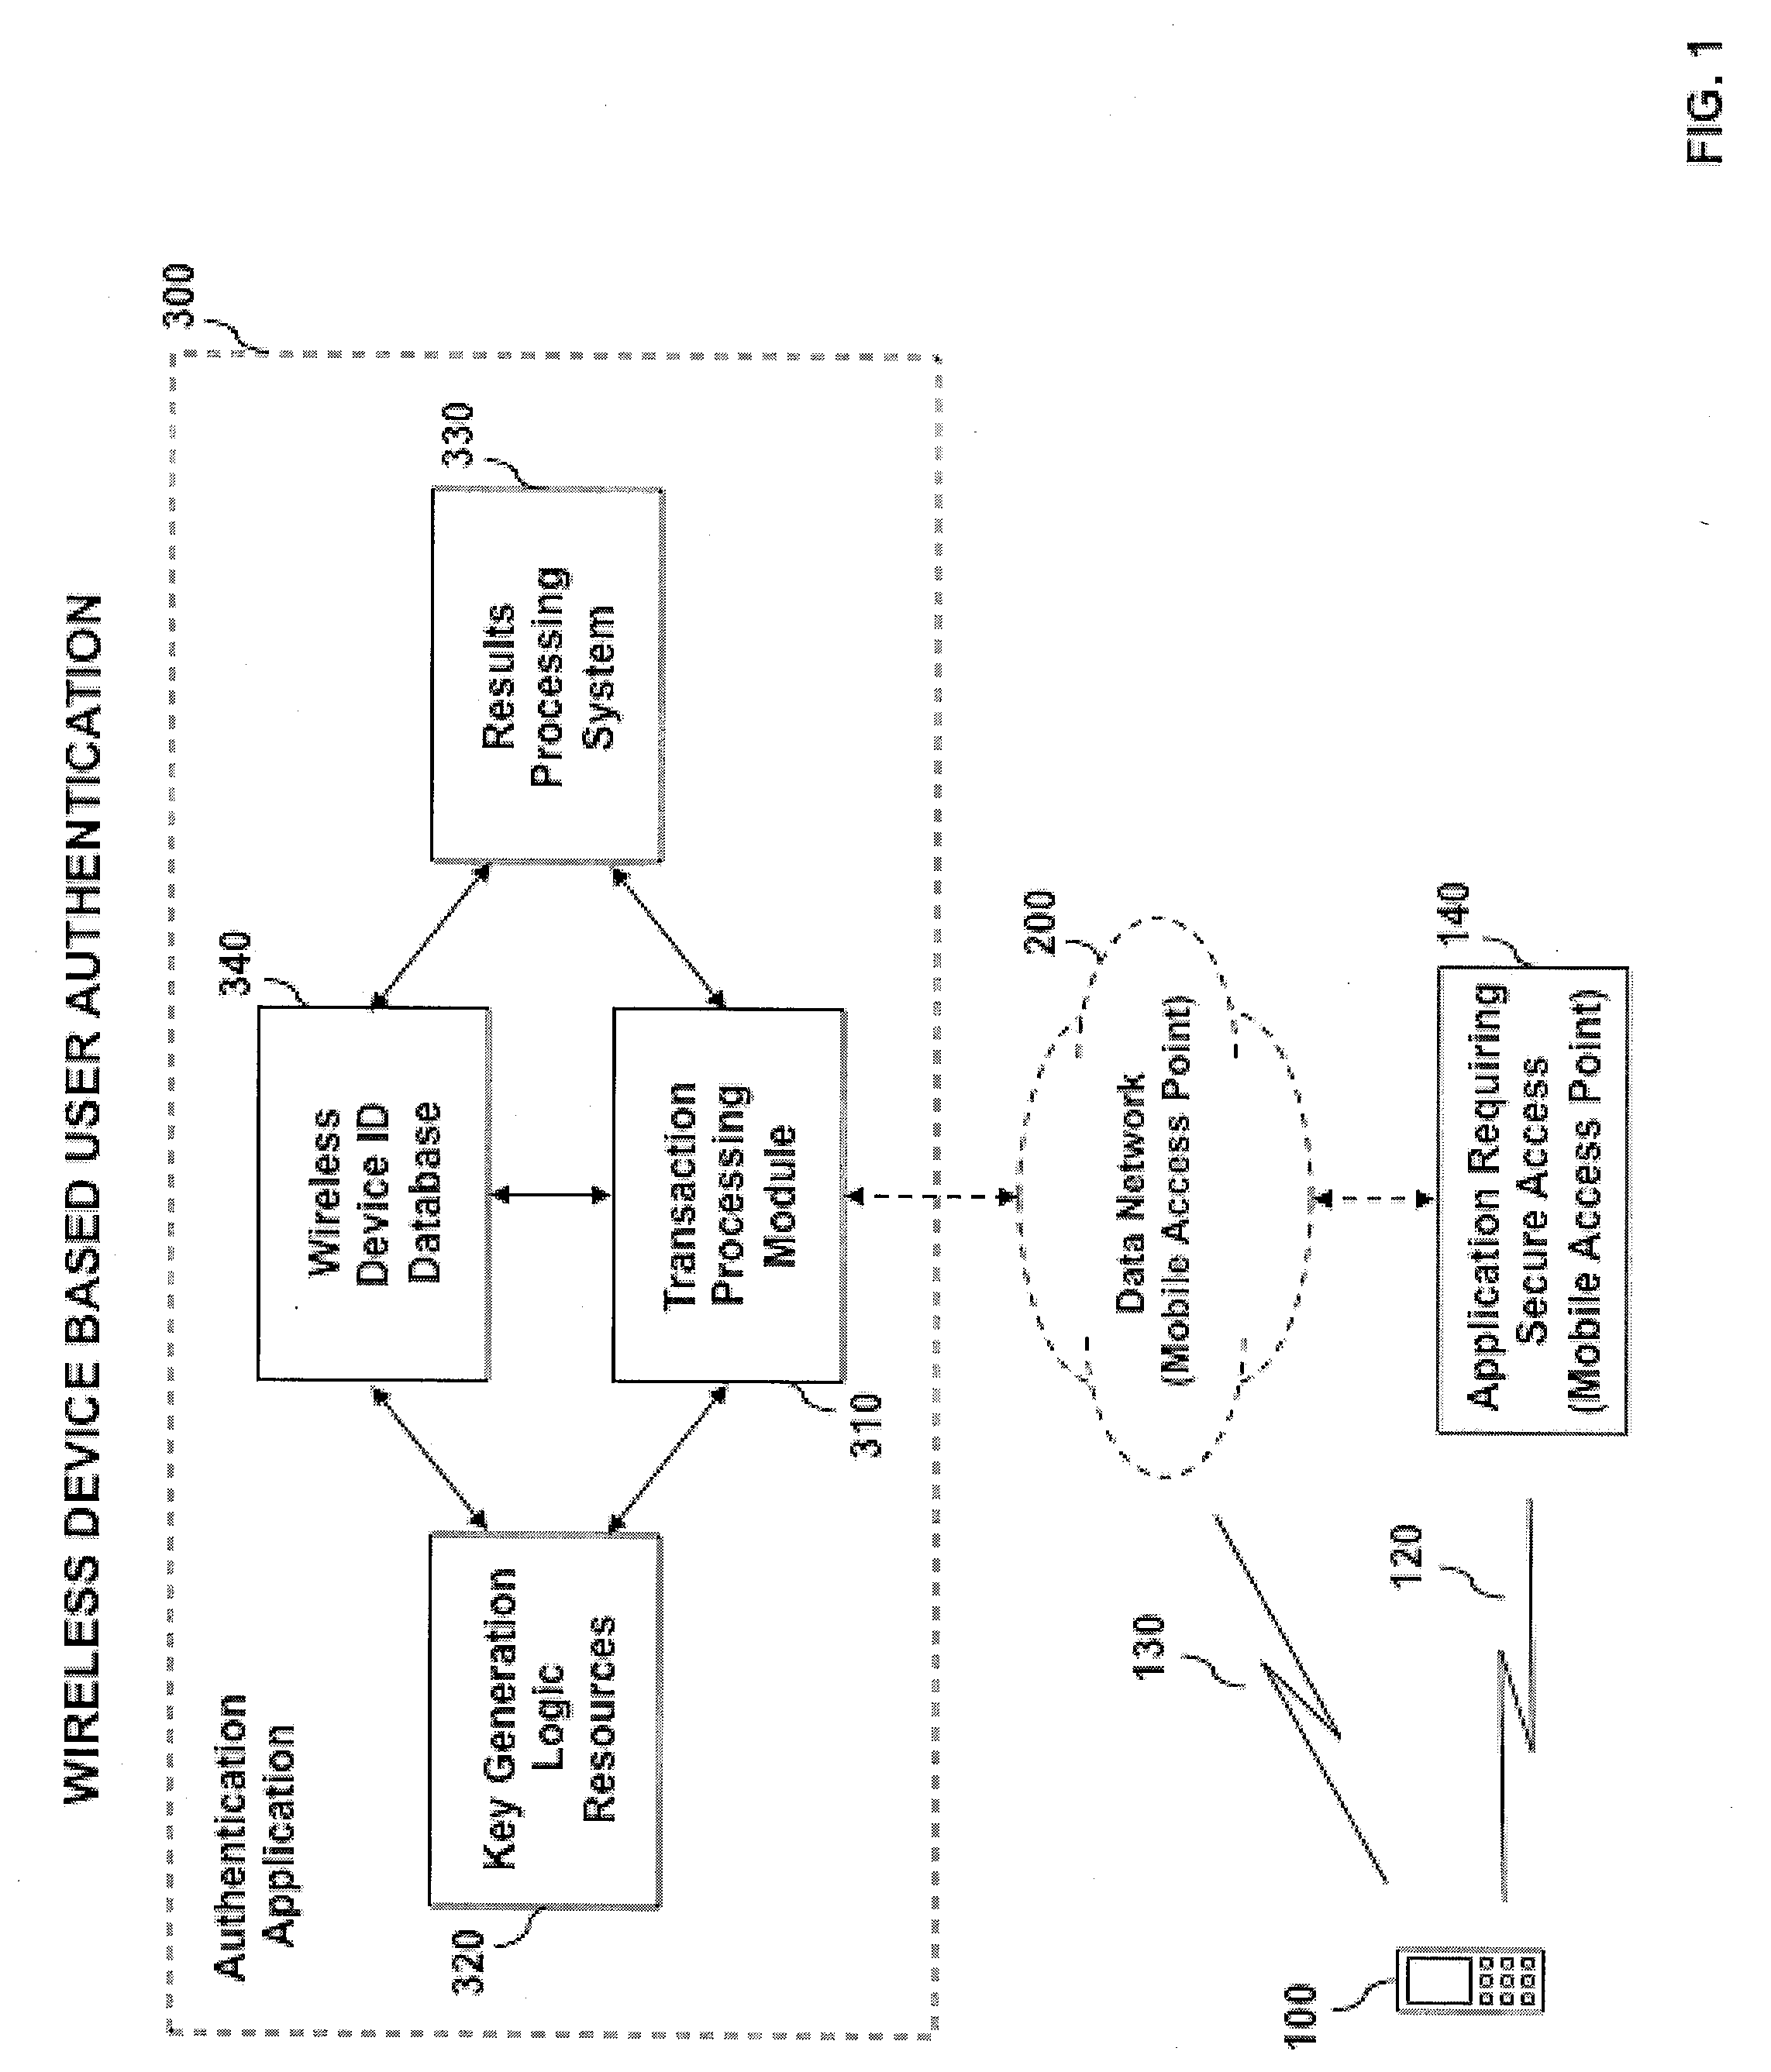 System and method for wireless device based user authentication